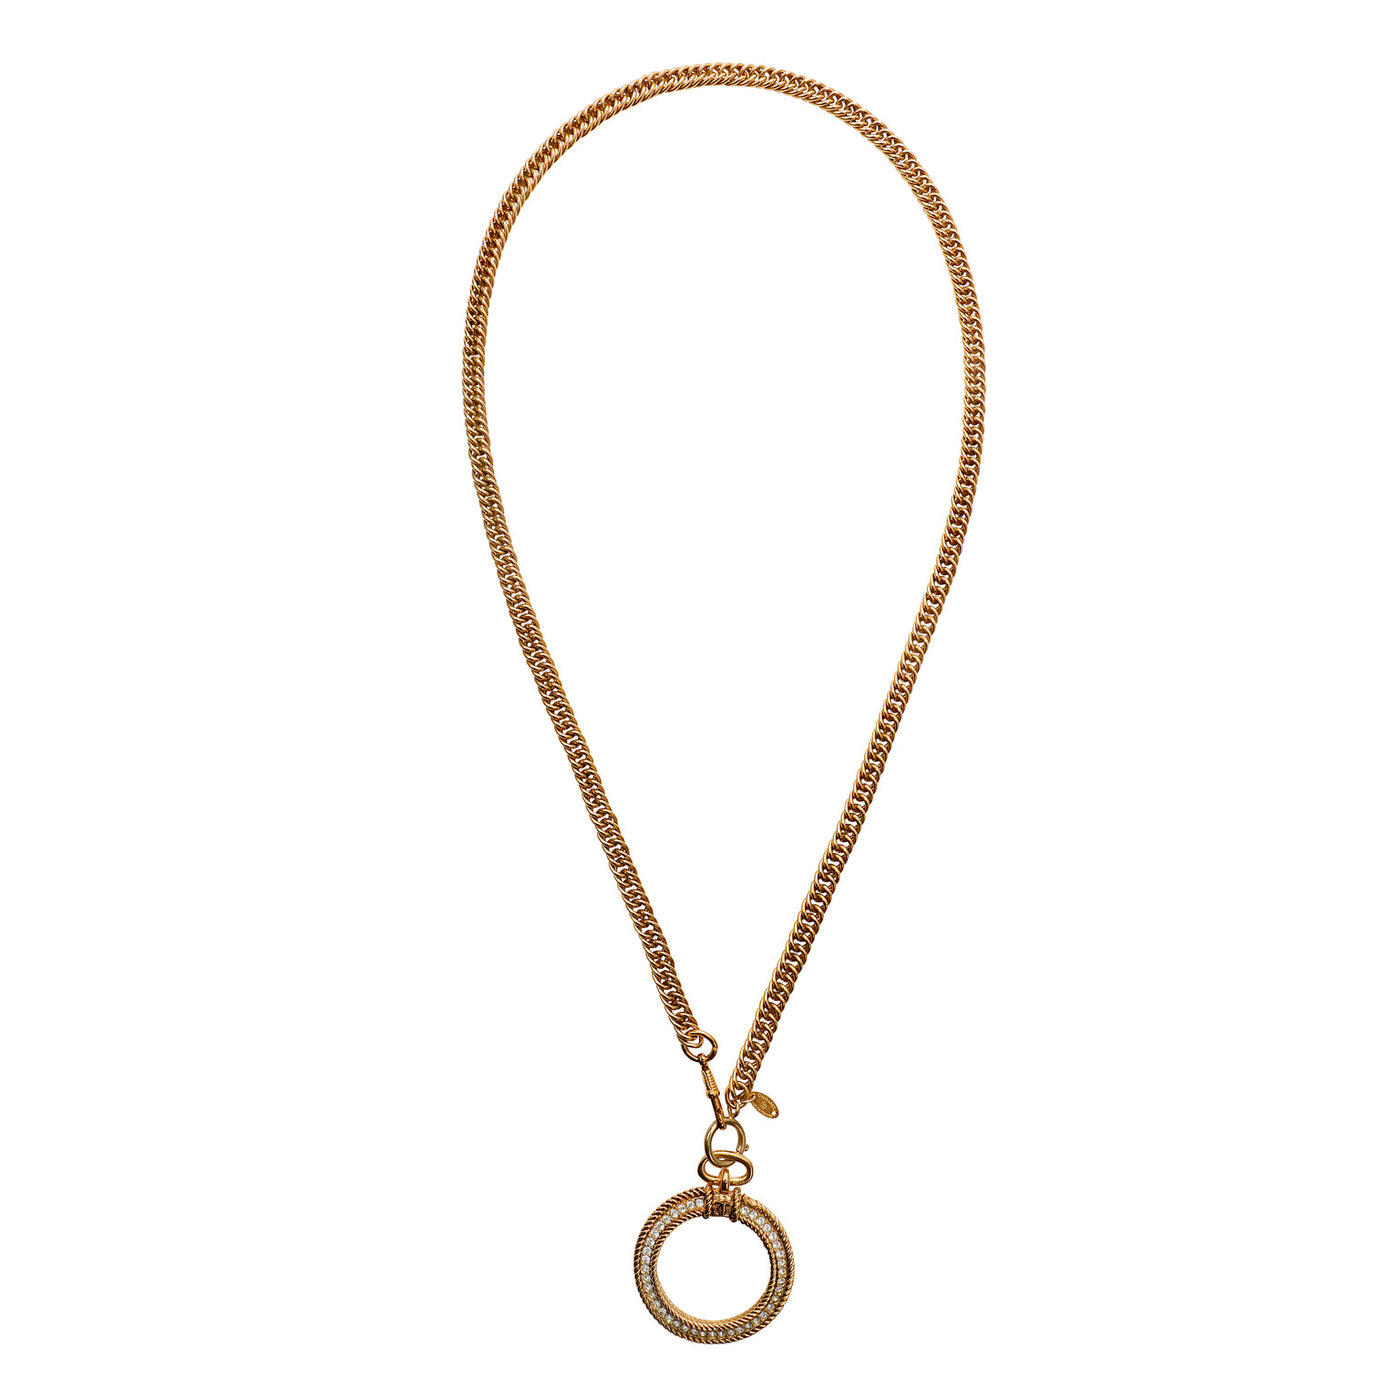 Chanel 24kt Gold Plated Monocle Necklace w/ Crystal Details